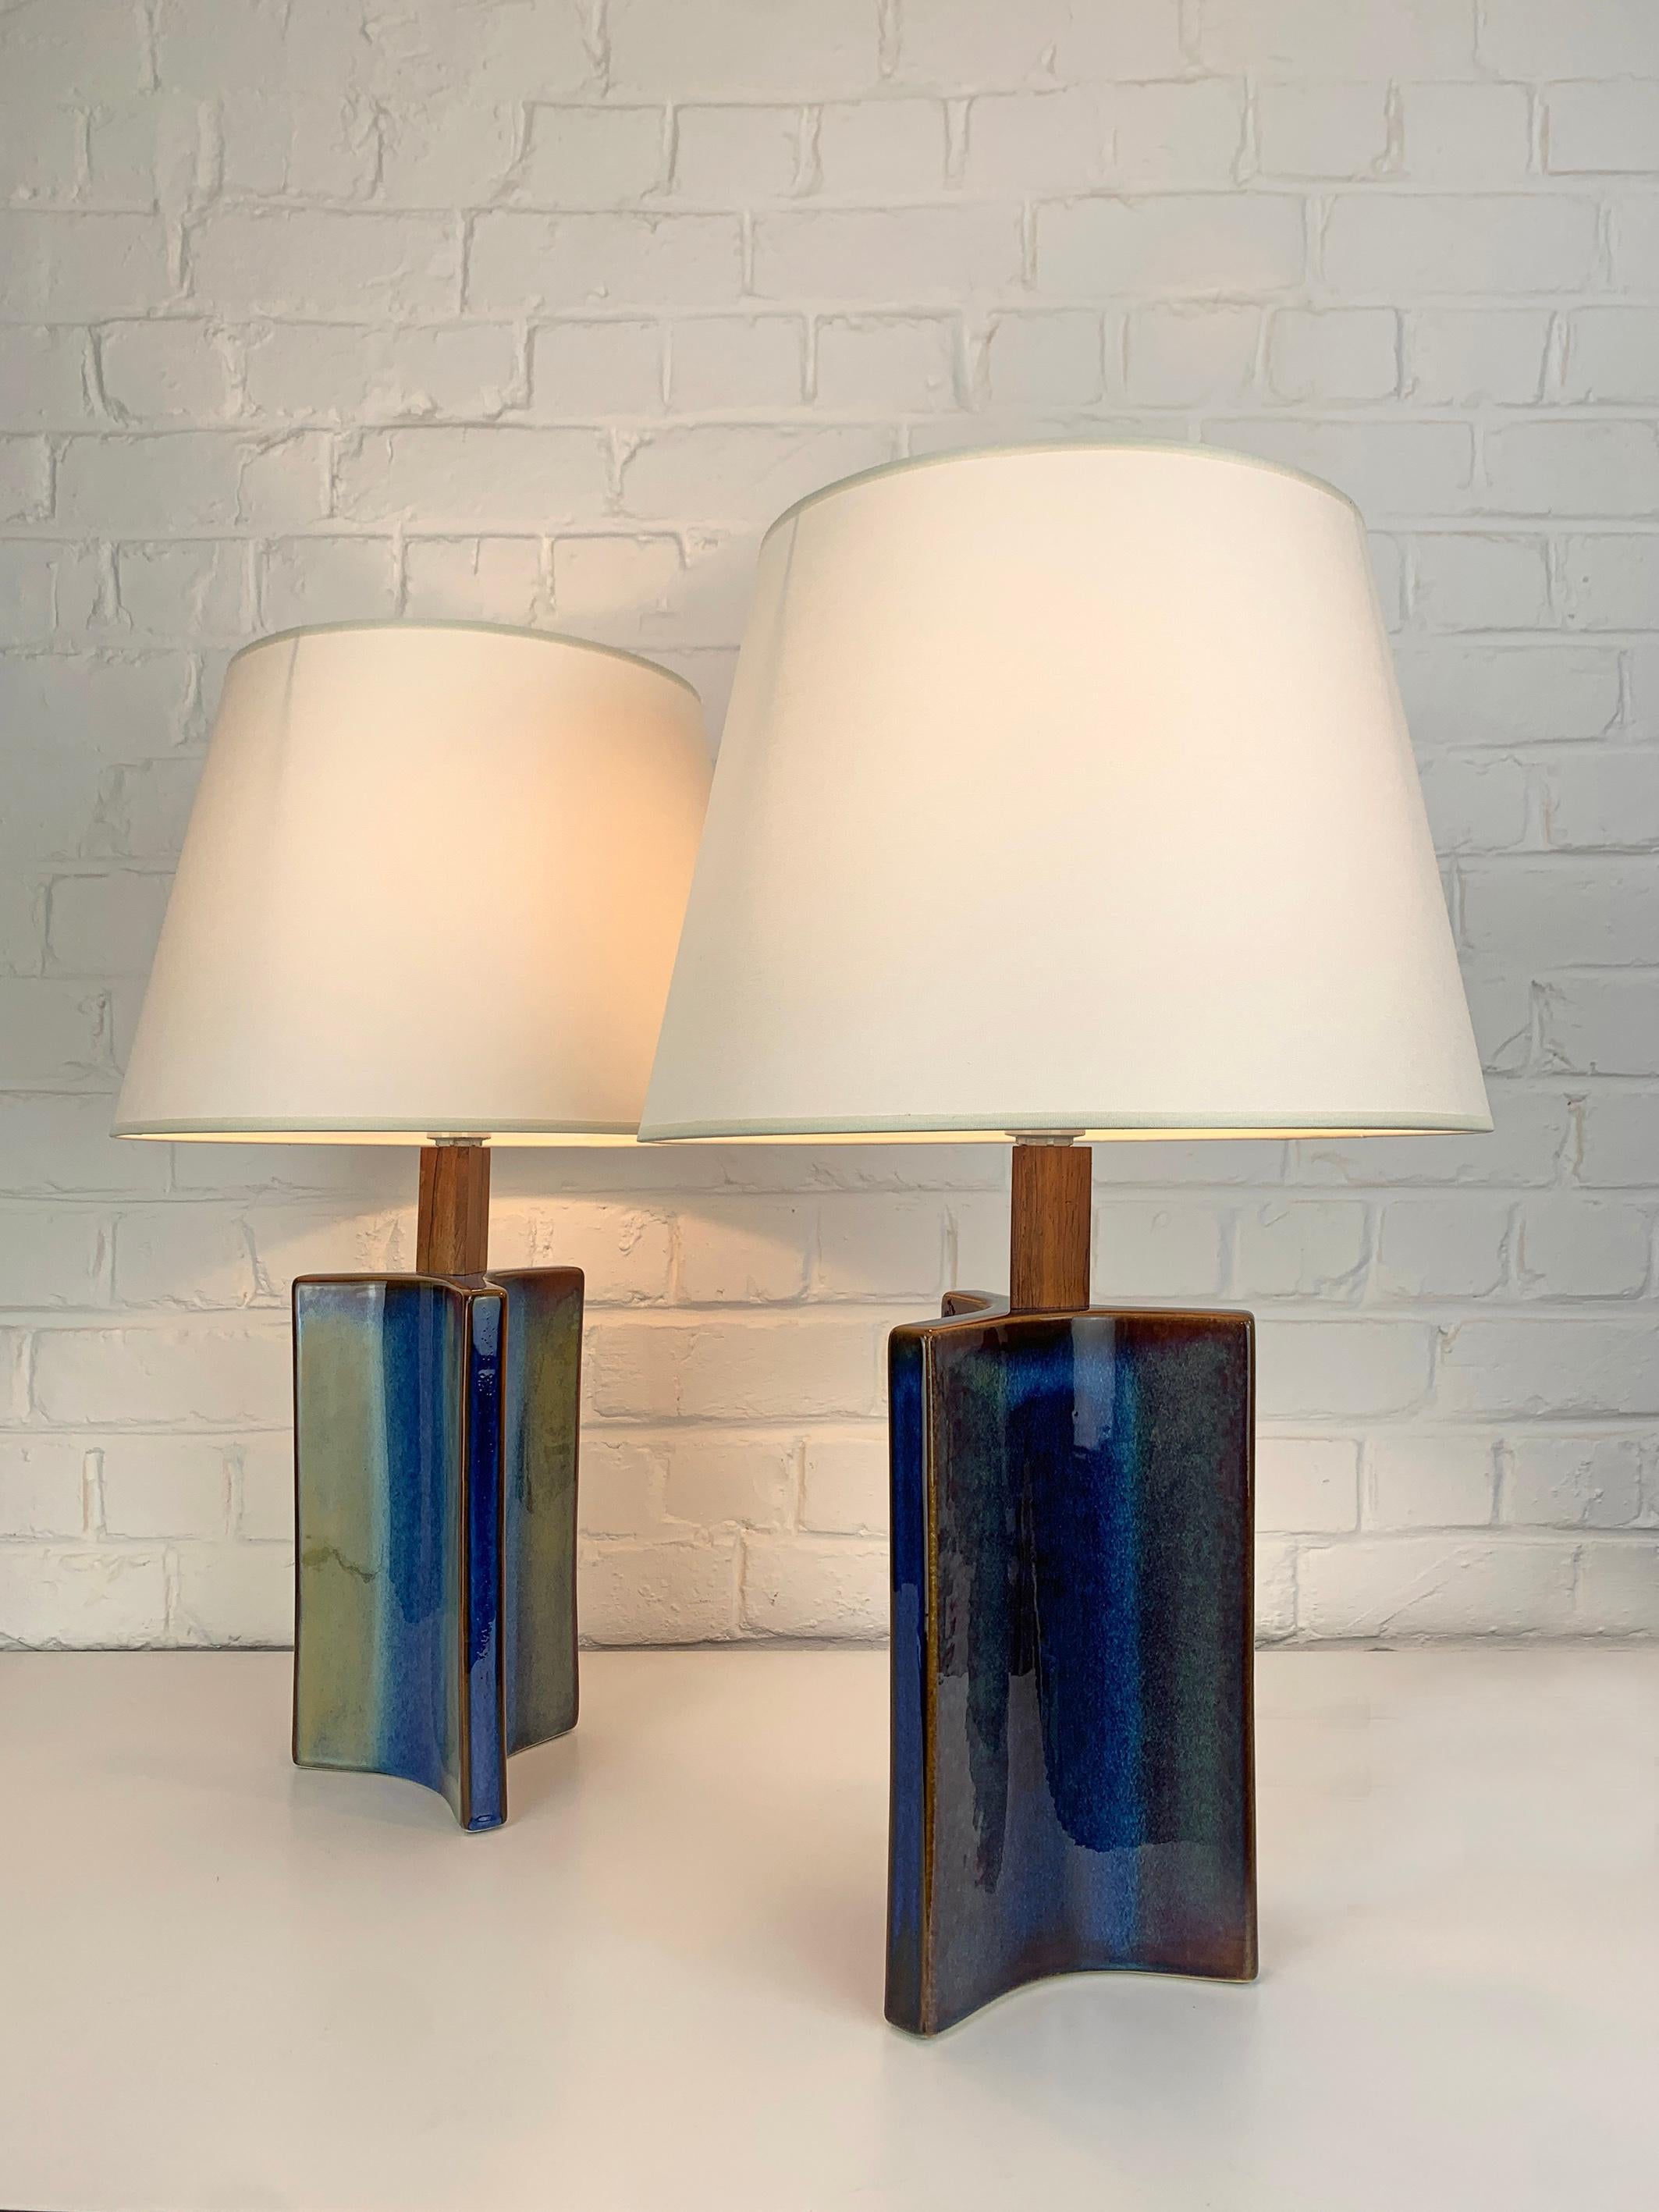 Pair of Danish Mid-Century stoneware table lamps of the 1960-70s. Glazed stoneware and teak wood.

Sculptural triangular lamp bases, blue glaze with green/brown colour effects. Very unusual shape !

Manufactured by Søholm Stentøj (Soholm pottery) on